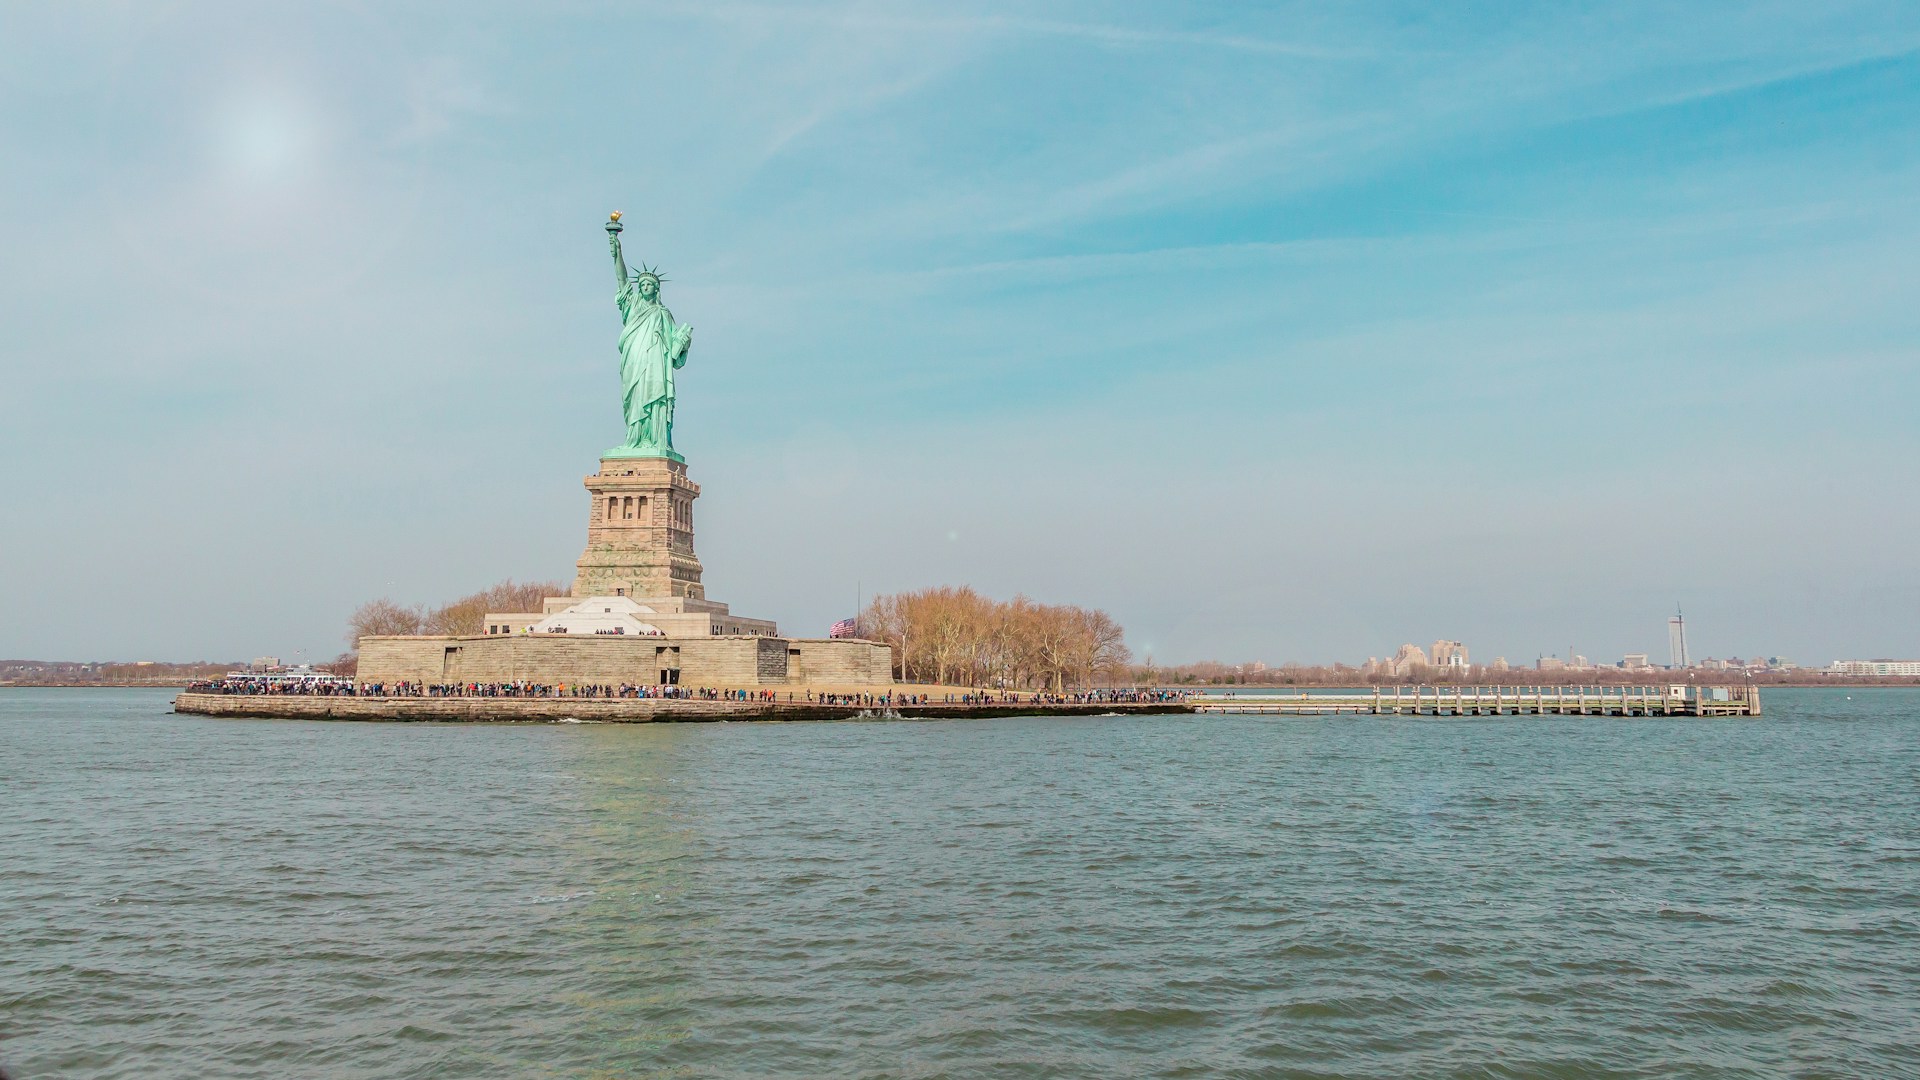 Statue Of Liberty on island surrounded by water